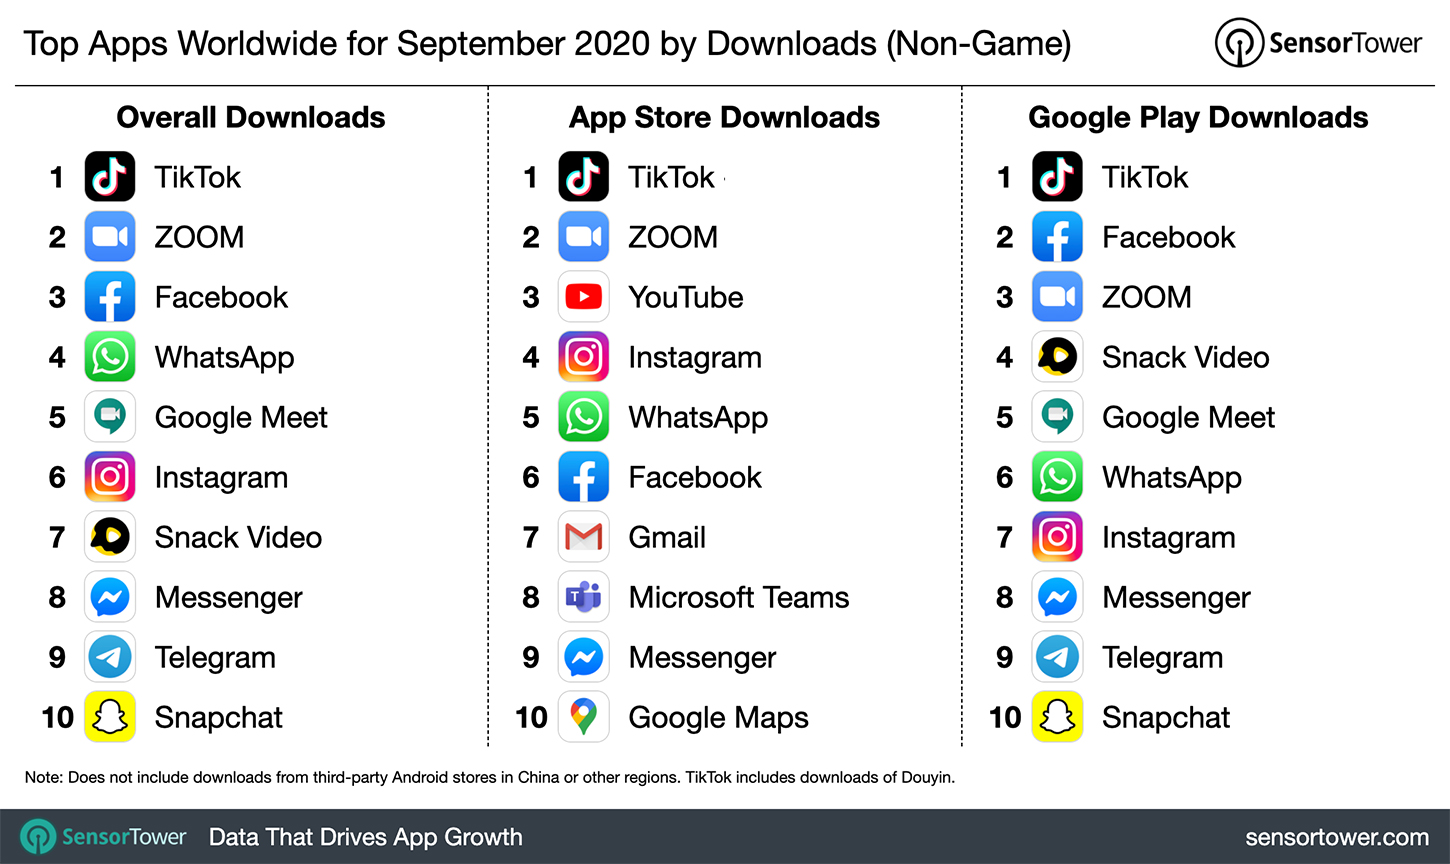 Top Apps Worldwide for September 2020 by Downloads